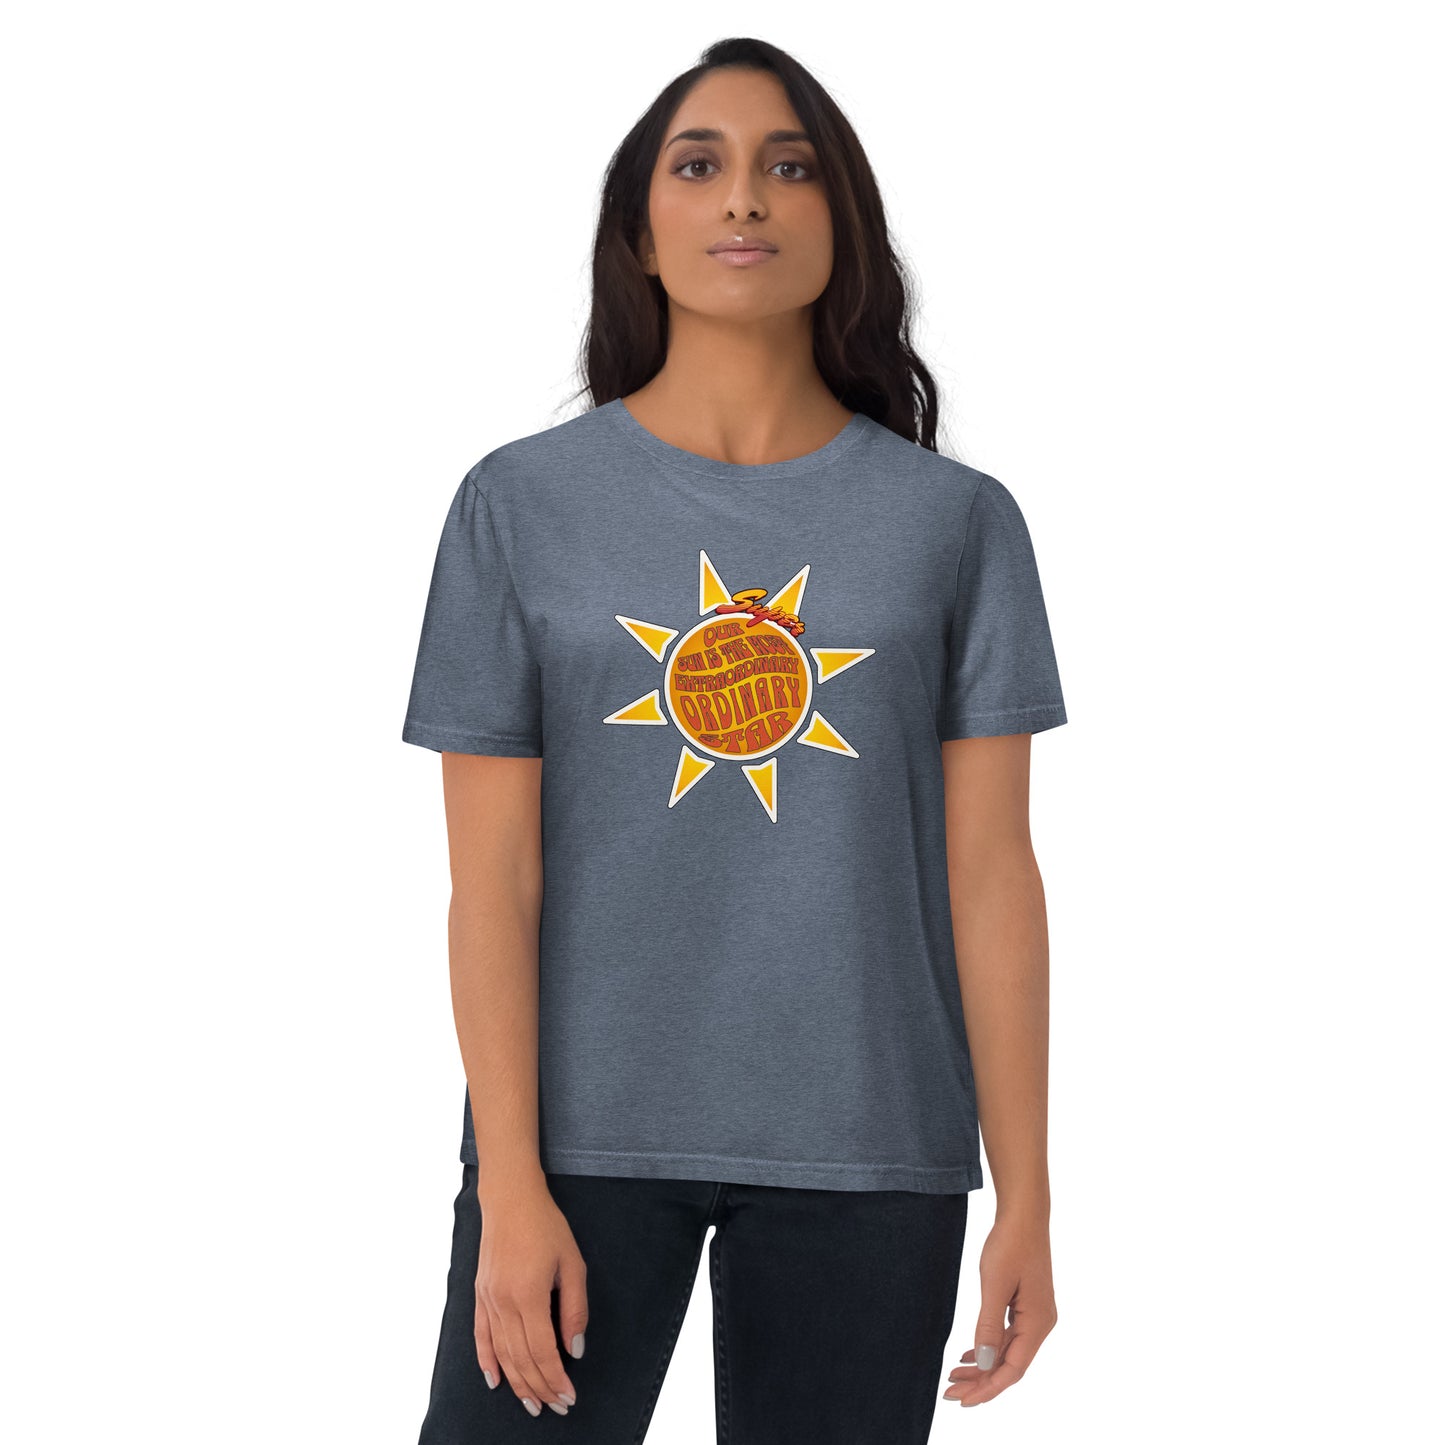 Unisex organic cotton t-shirt - We R So Lucky to Have such a Super Extra-'Ordinary' sun!